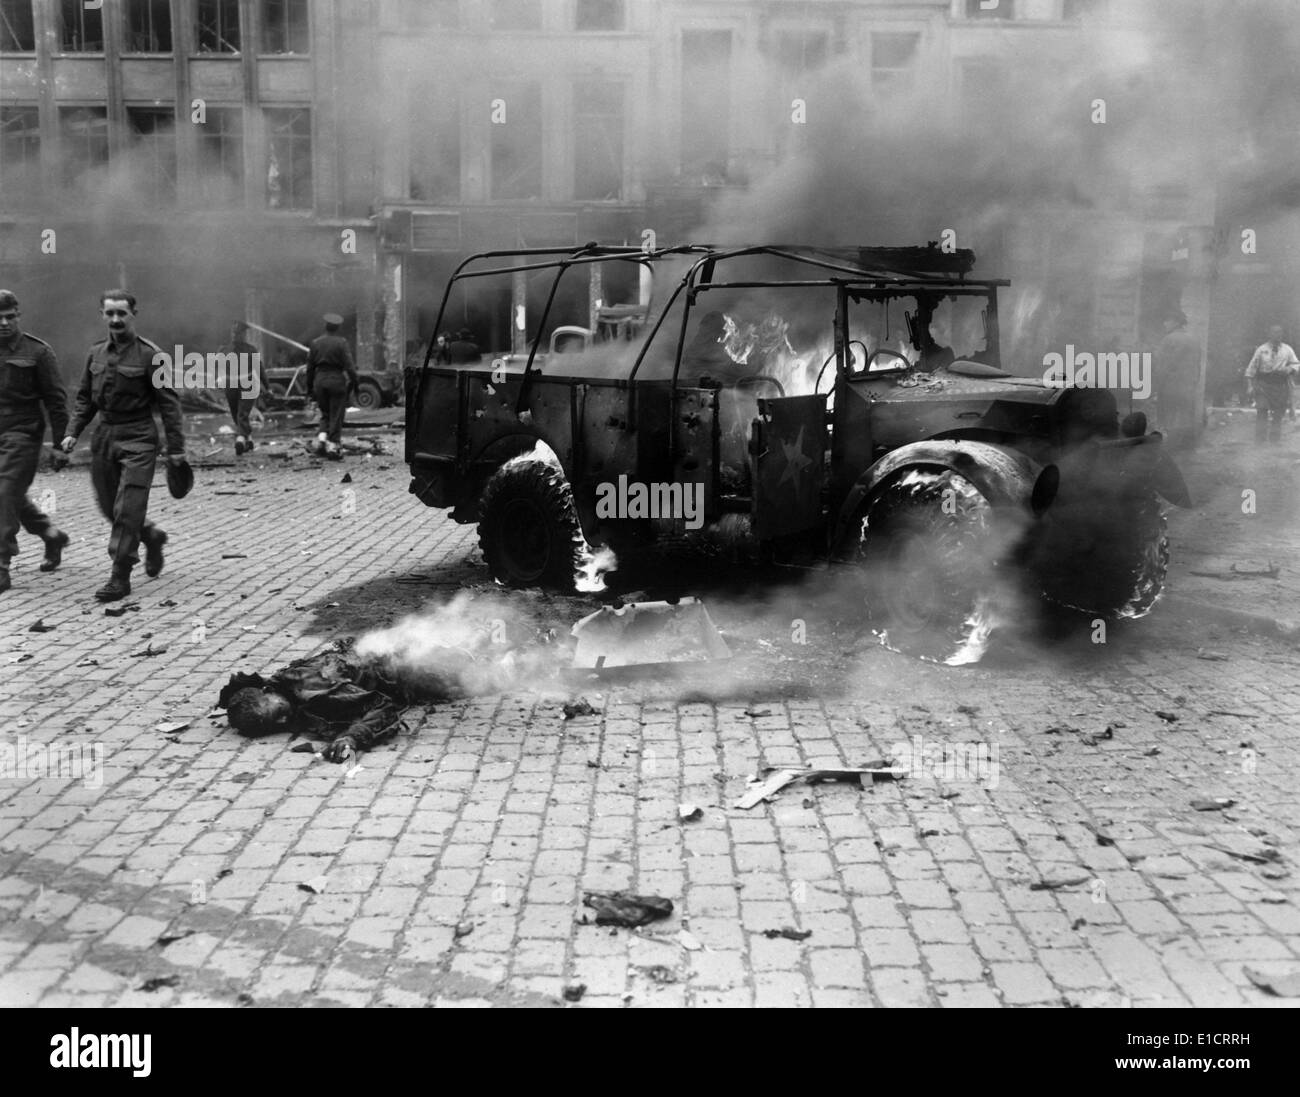 This boy's dead body and burning U.S. Jeep after a V-2 Strike in Antwerp, Belgium, Nov. 27, 1944. Allied soldiers walk nearby, Stock Photo